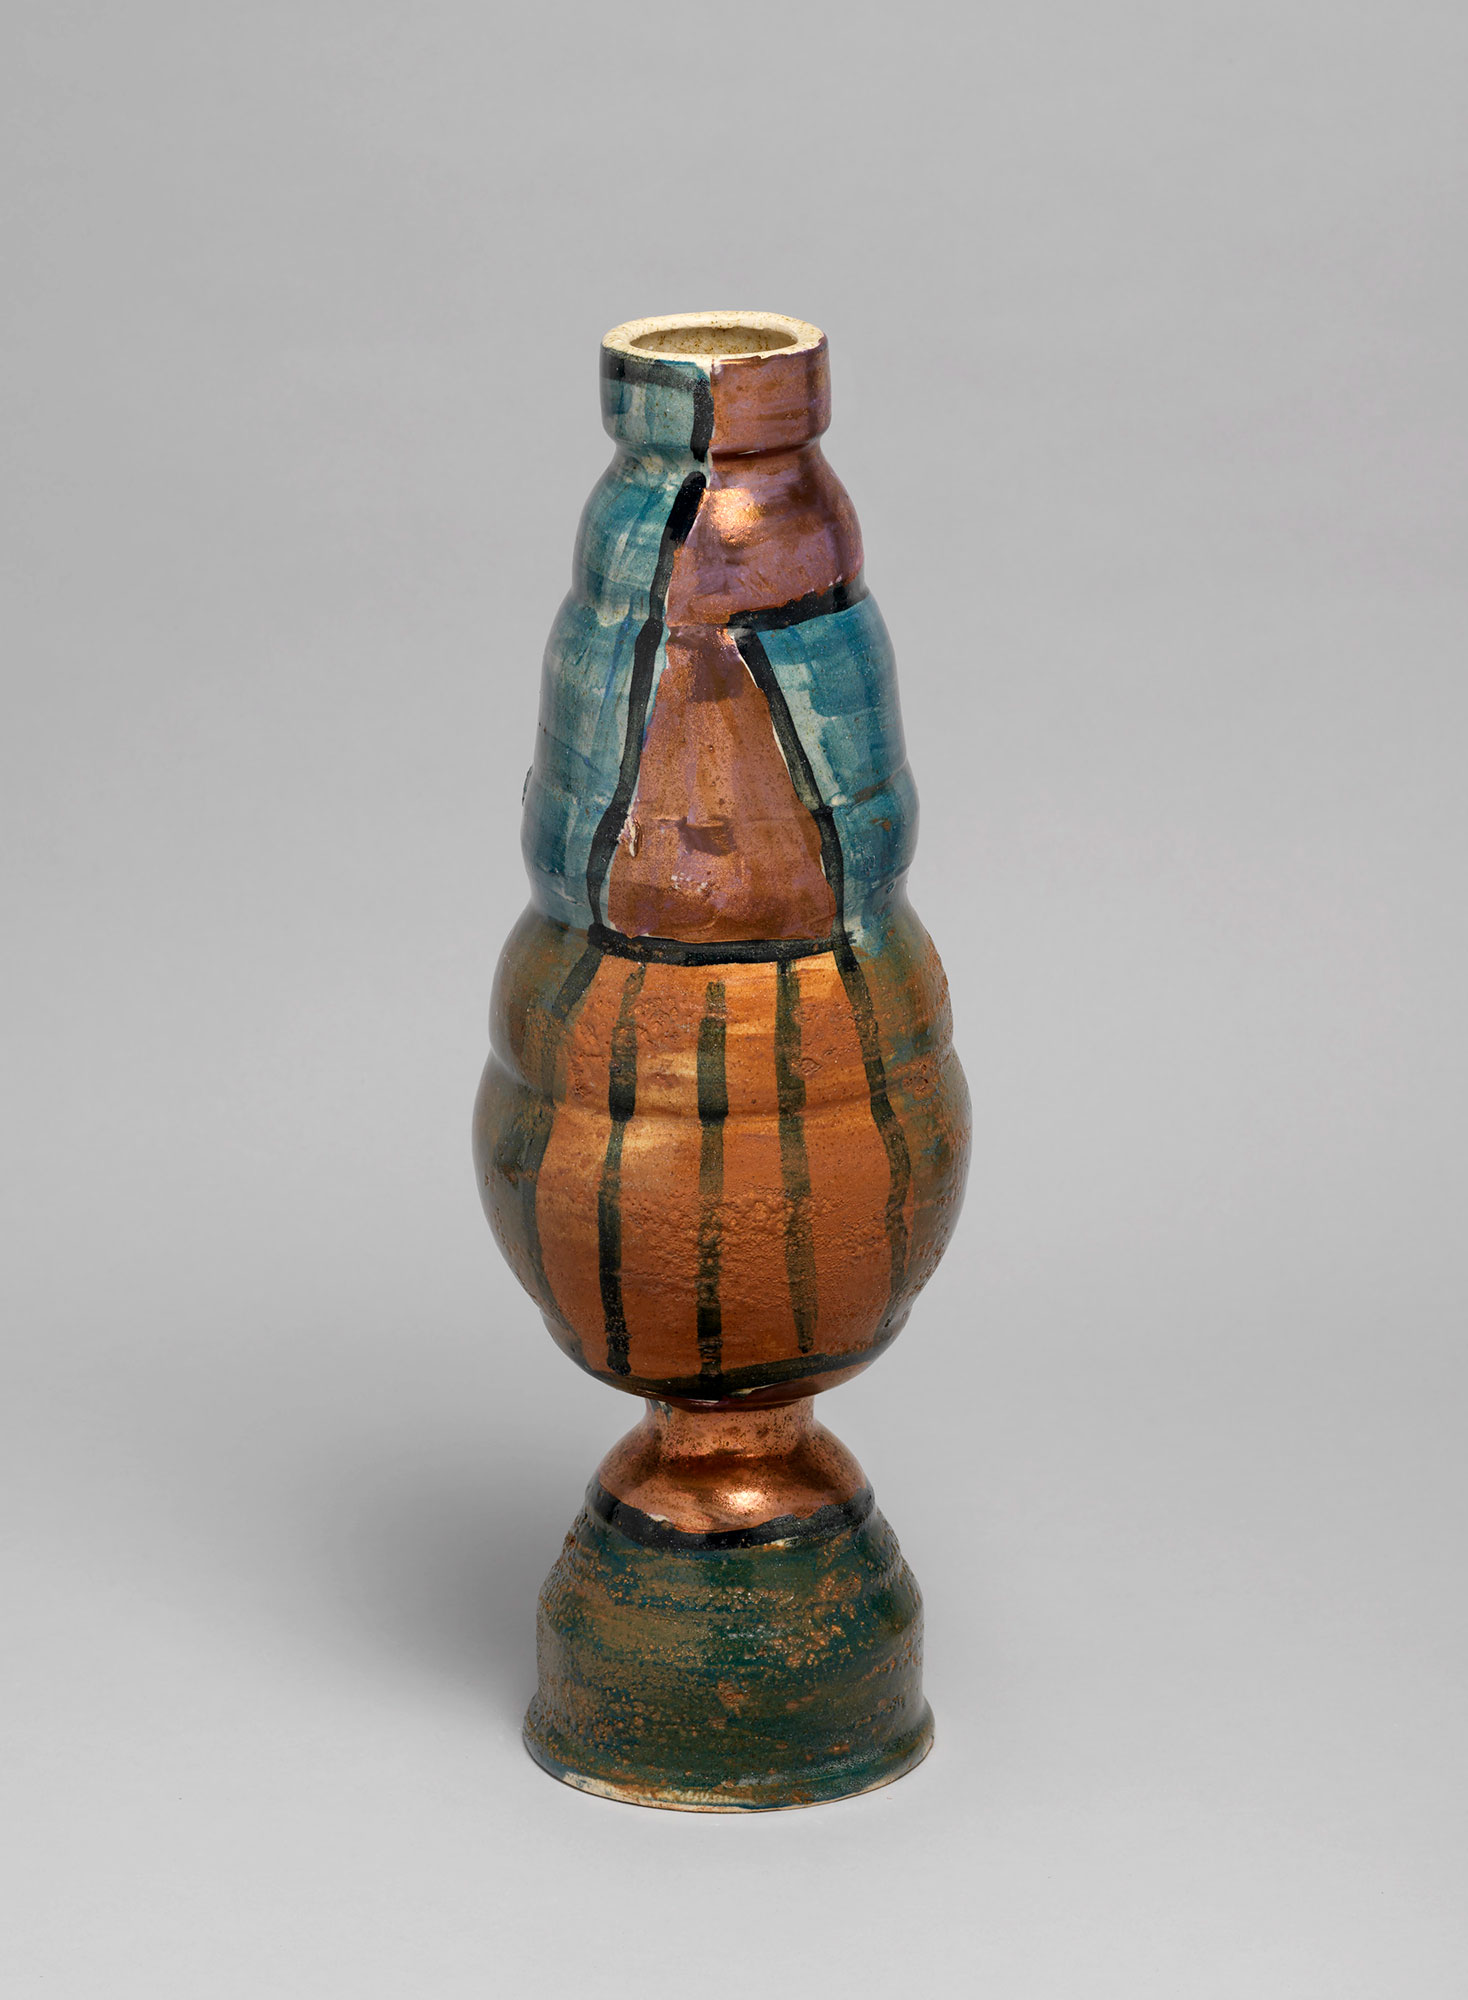 A vase with a base painted dark green, while the body is orange, bronze, turquoise, with black lines separating each color.